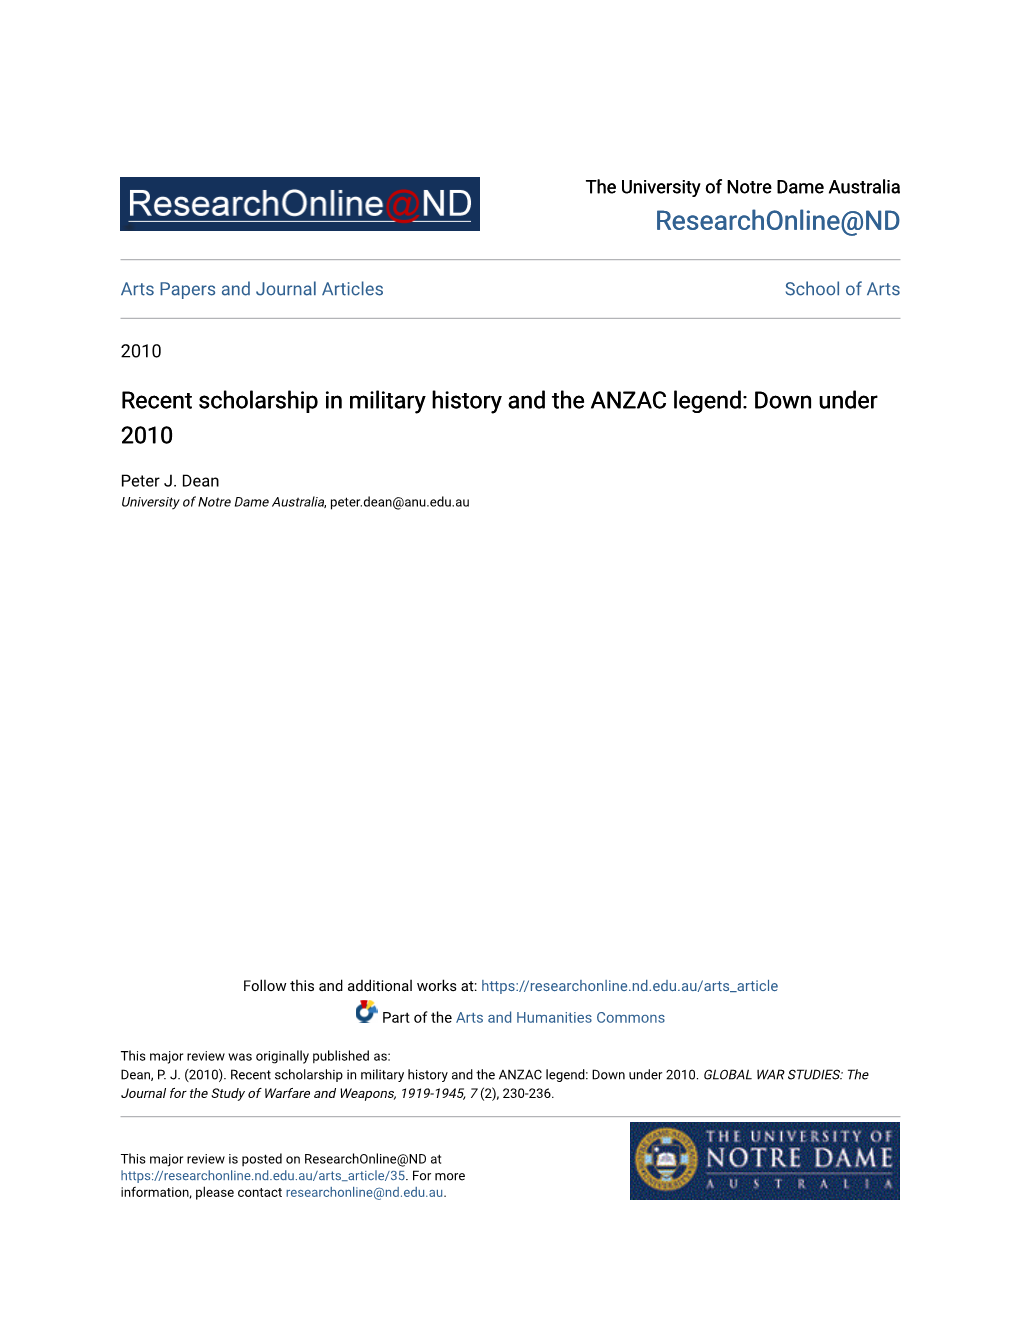 Recent Scholarship in Military History and the ANZAC Legend: Down Under 2010